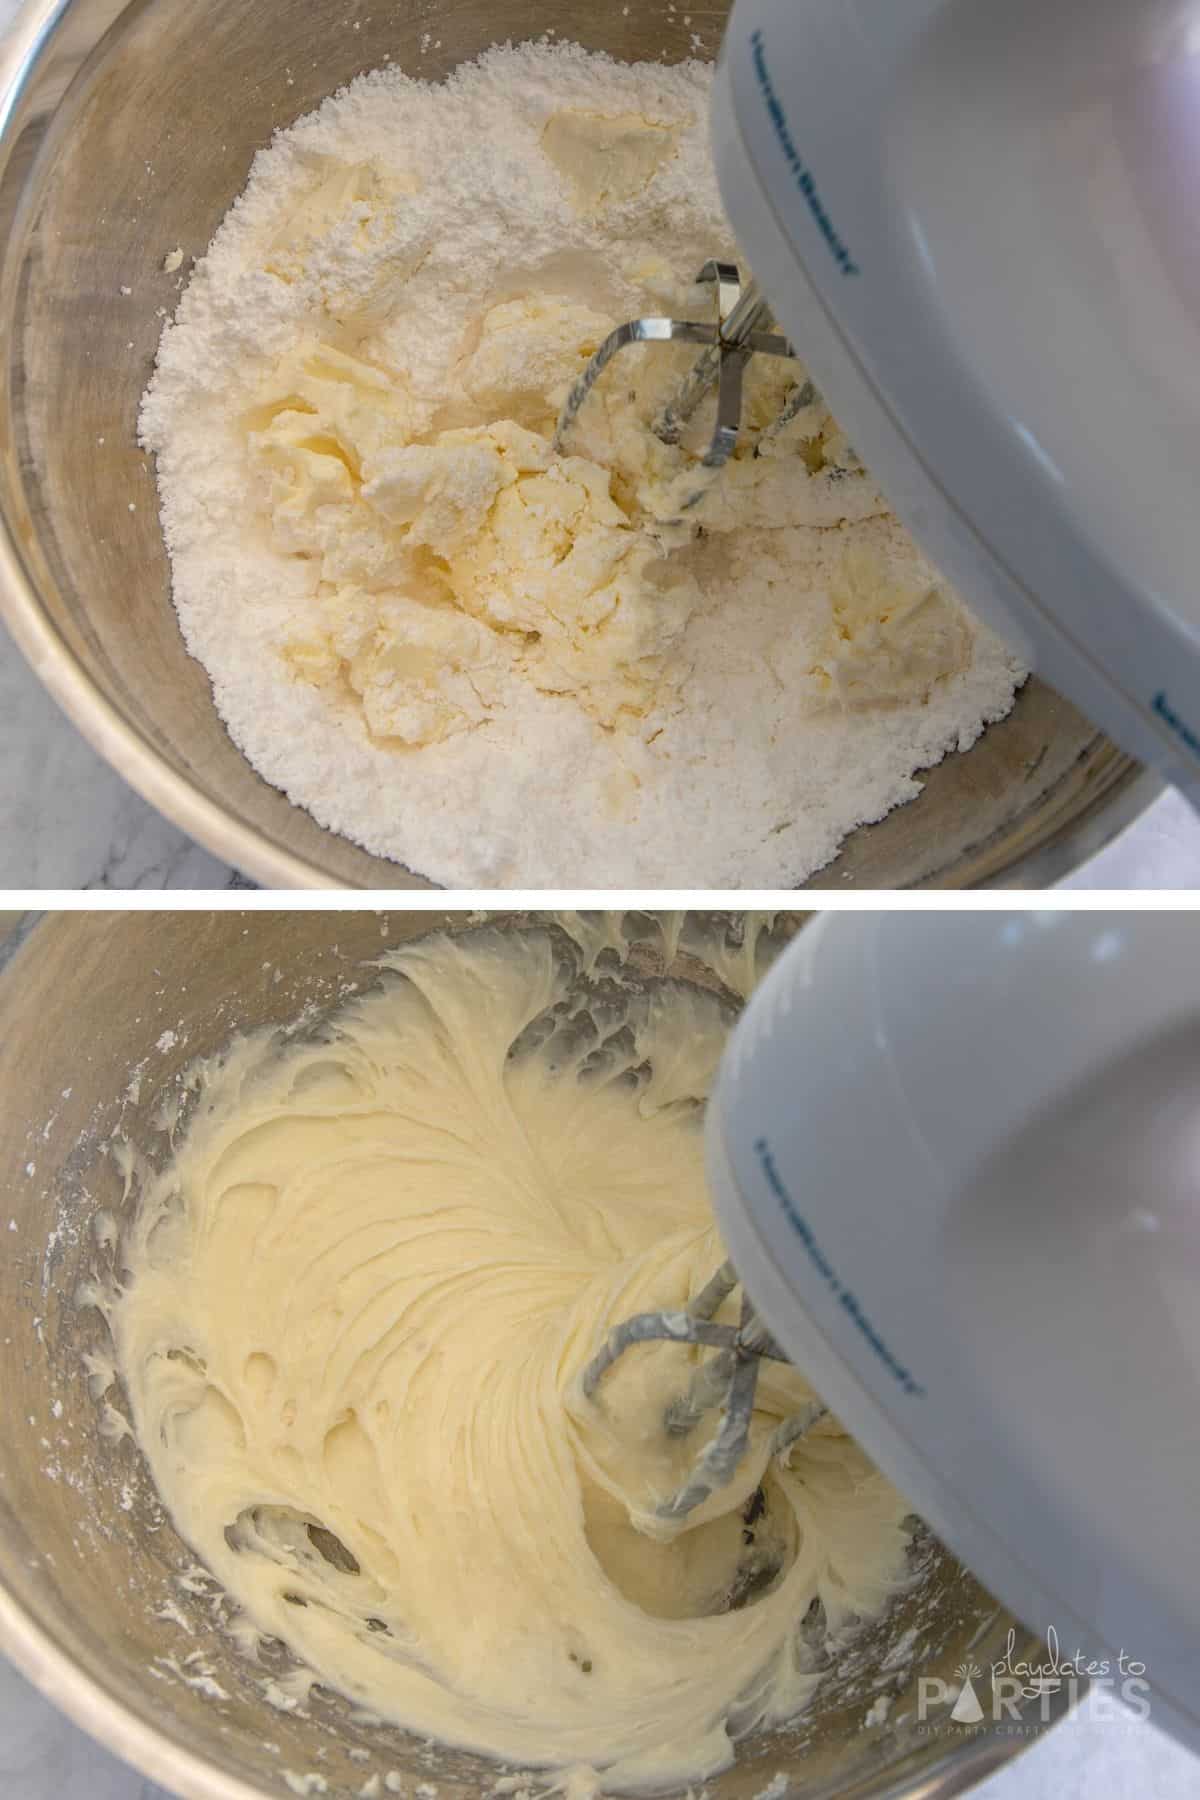 Beating cream cheese and powdered sugar until smooth.